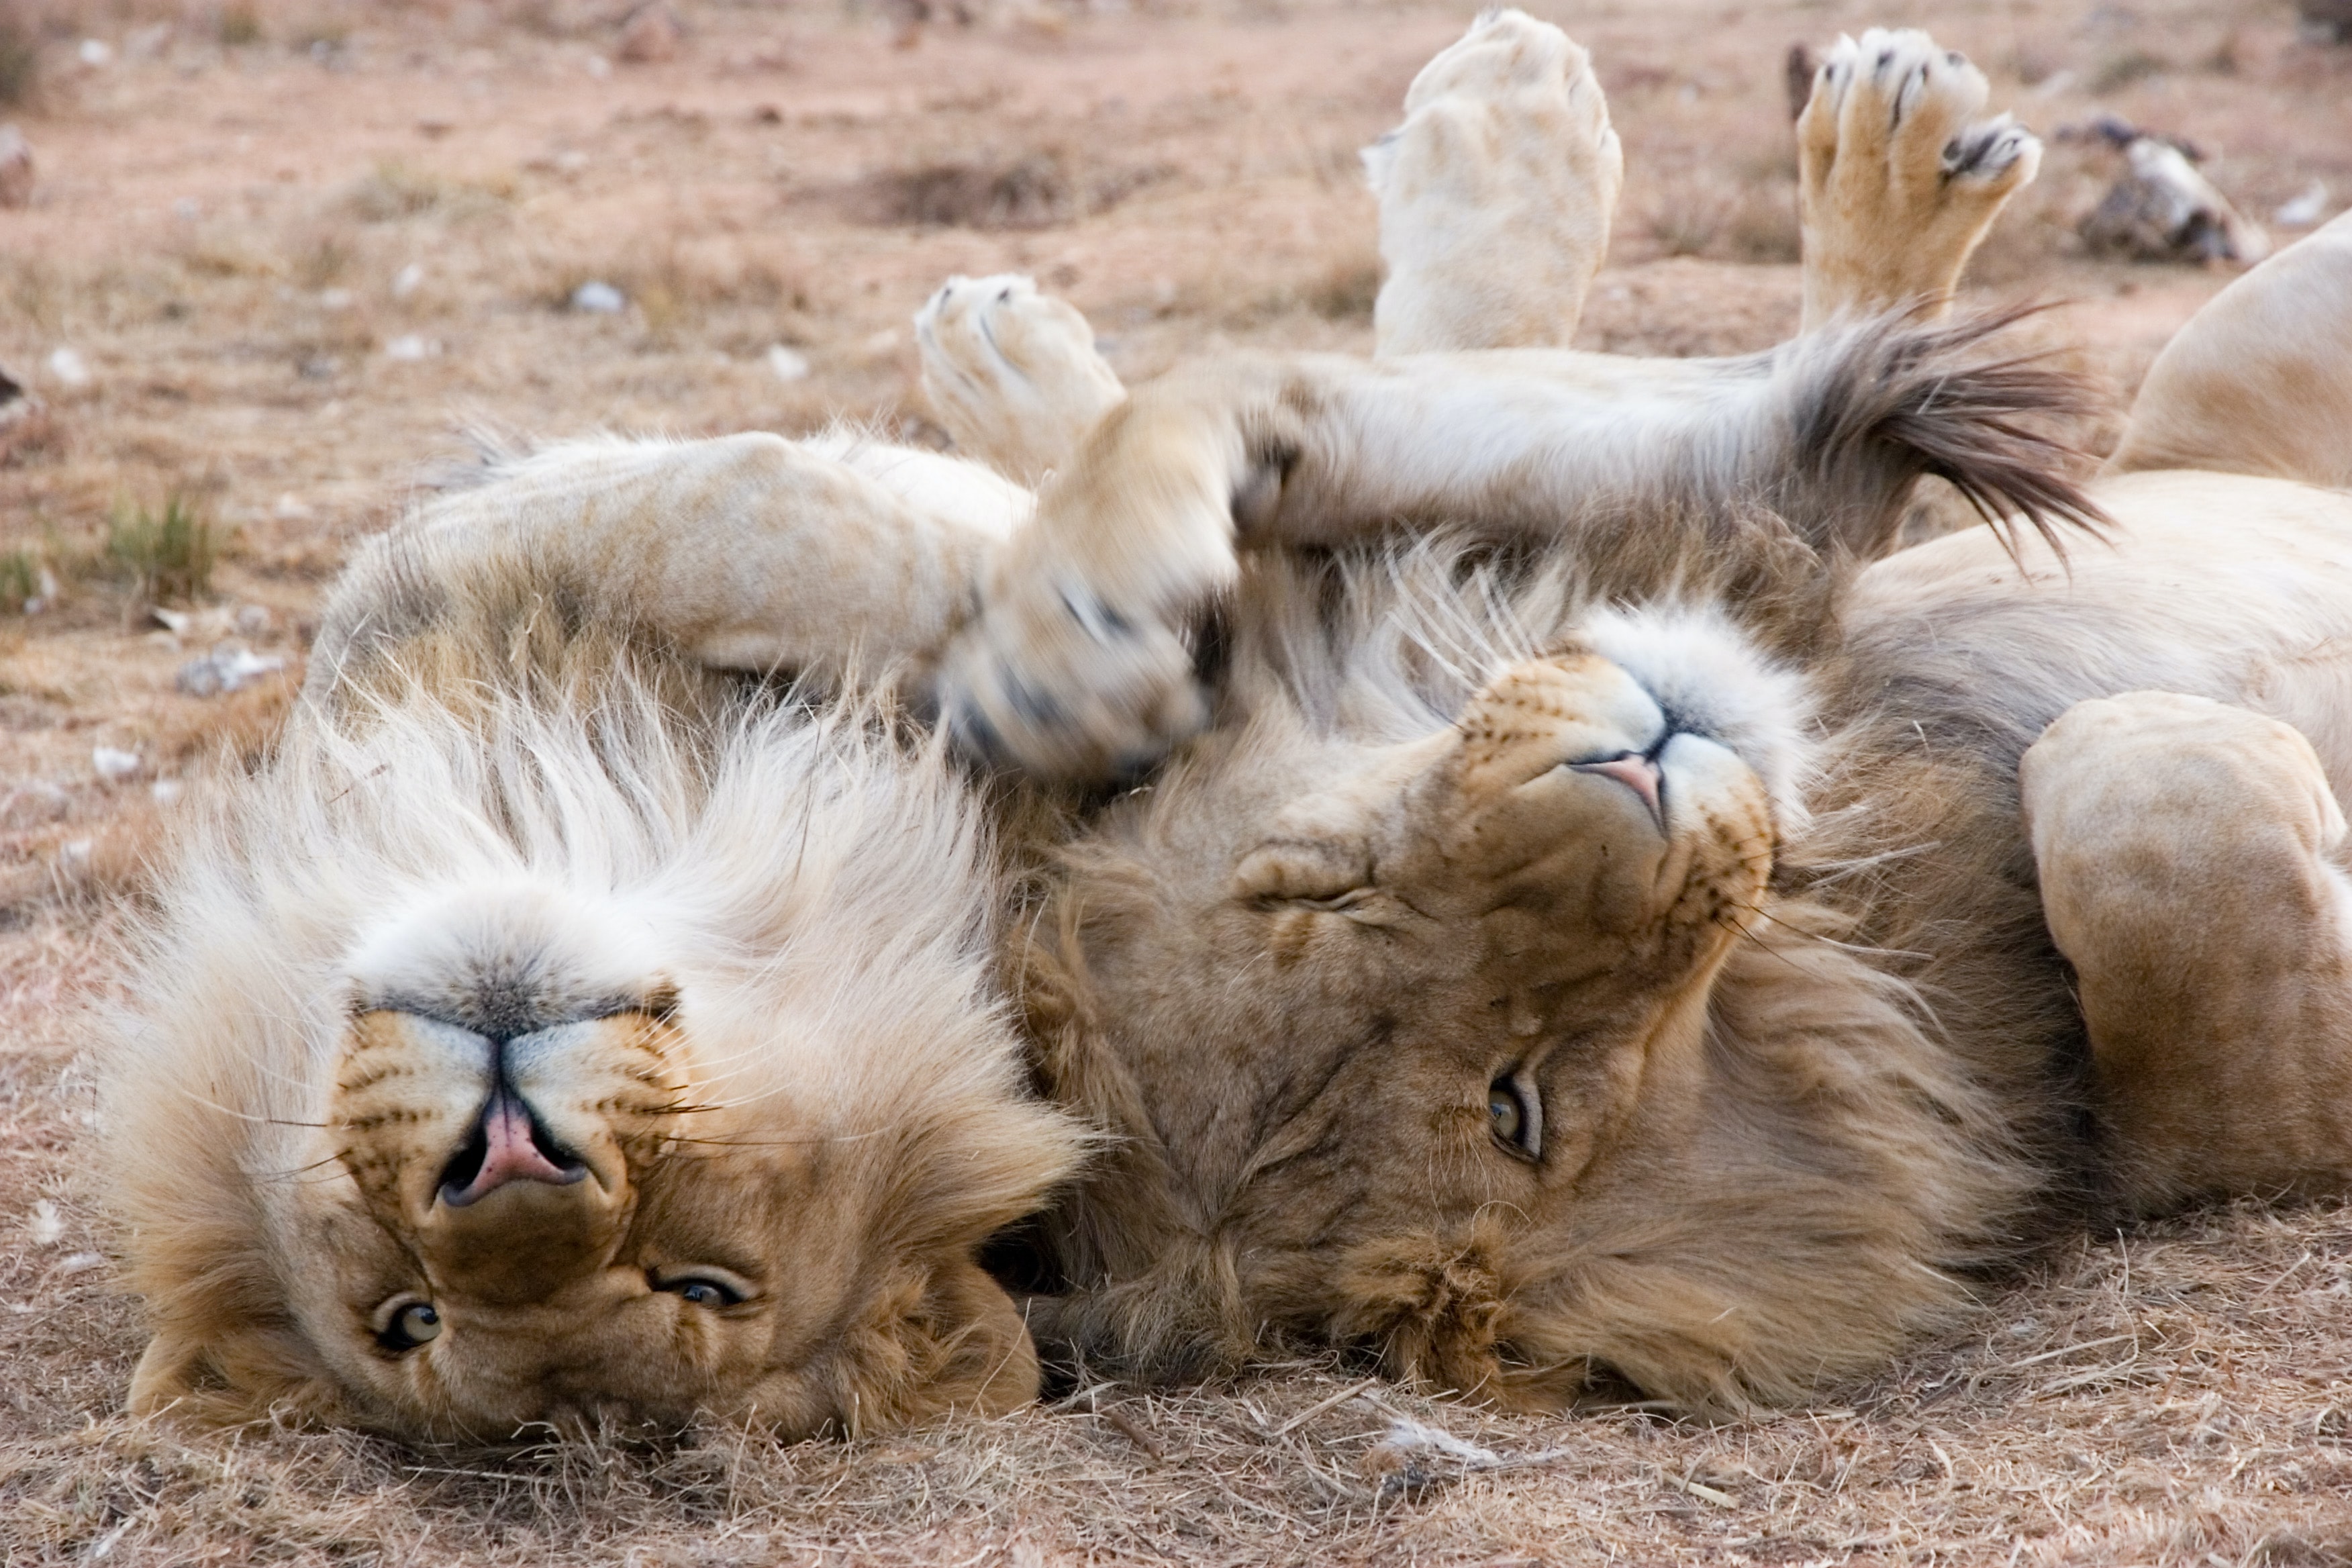 lions snuggling